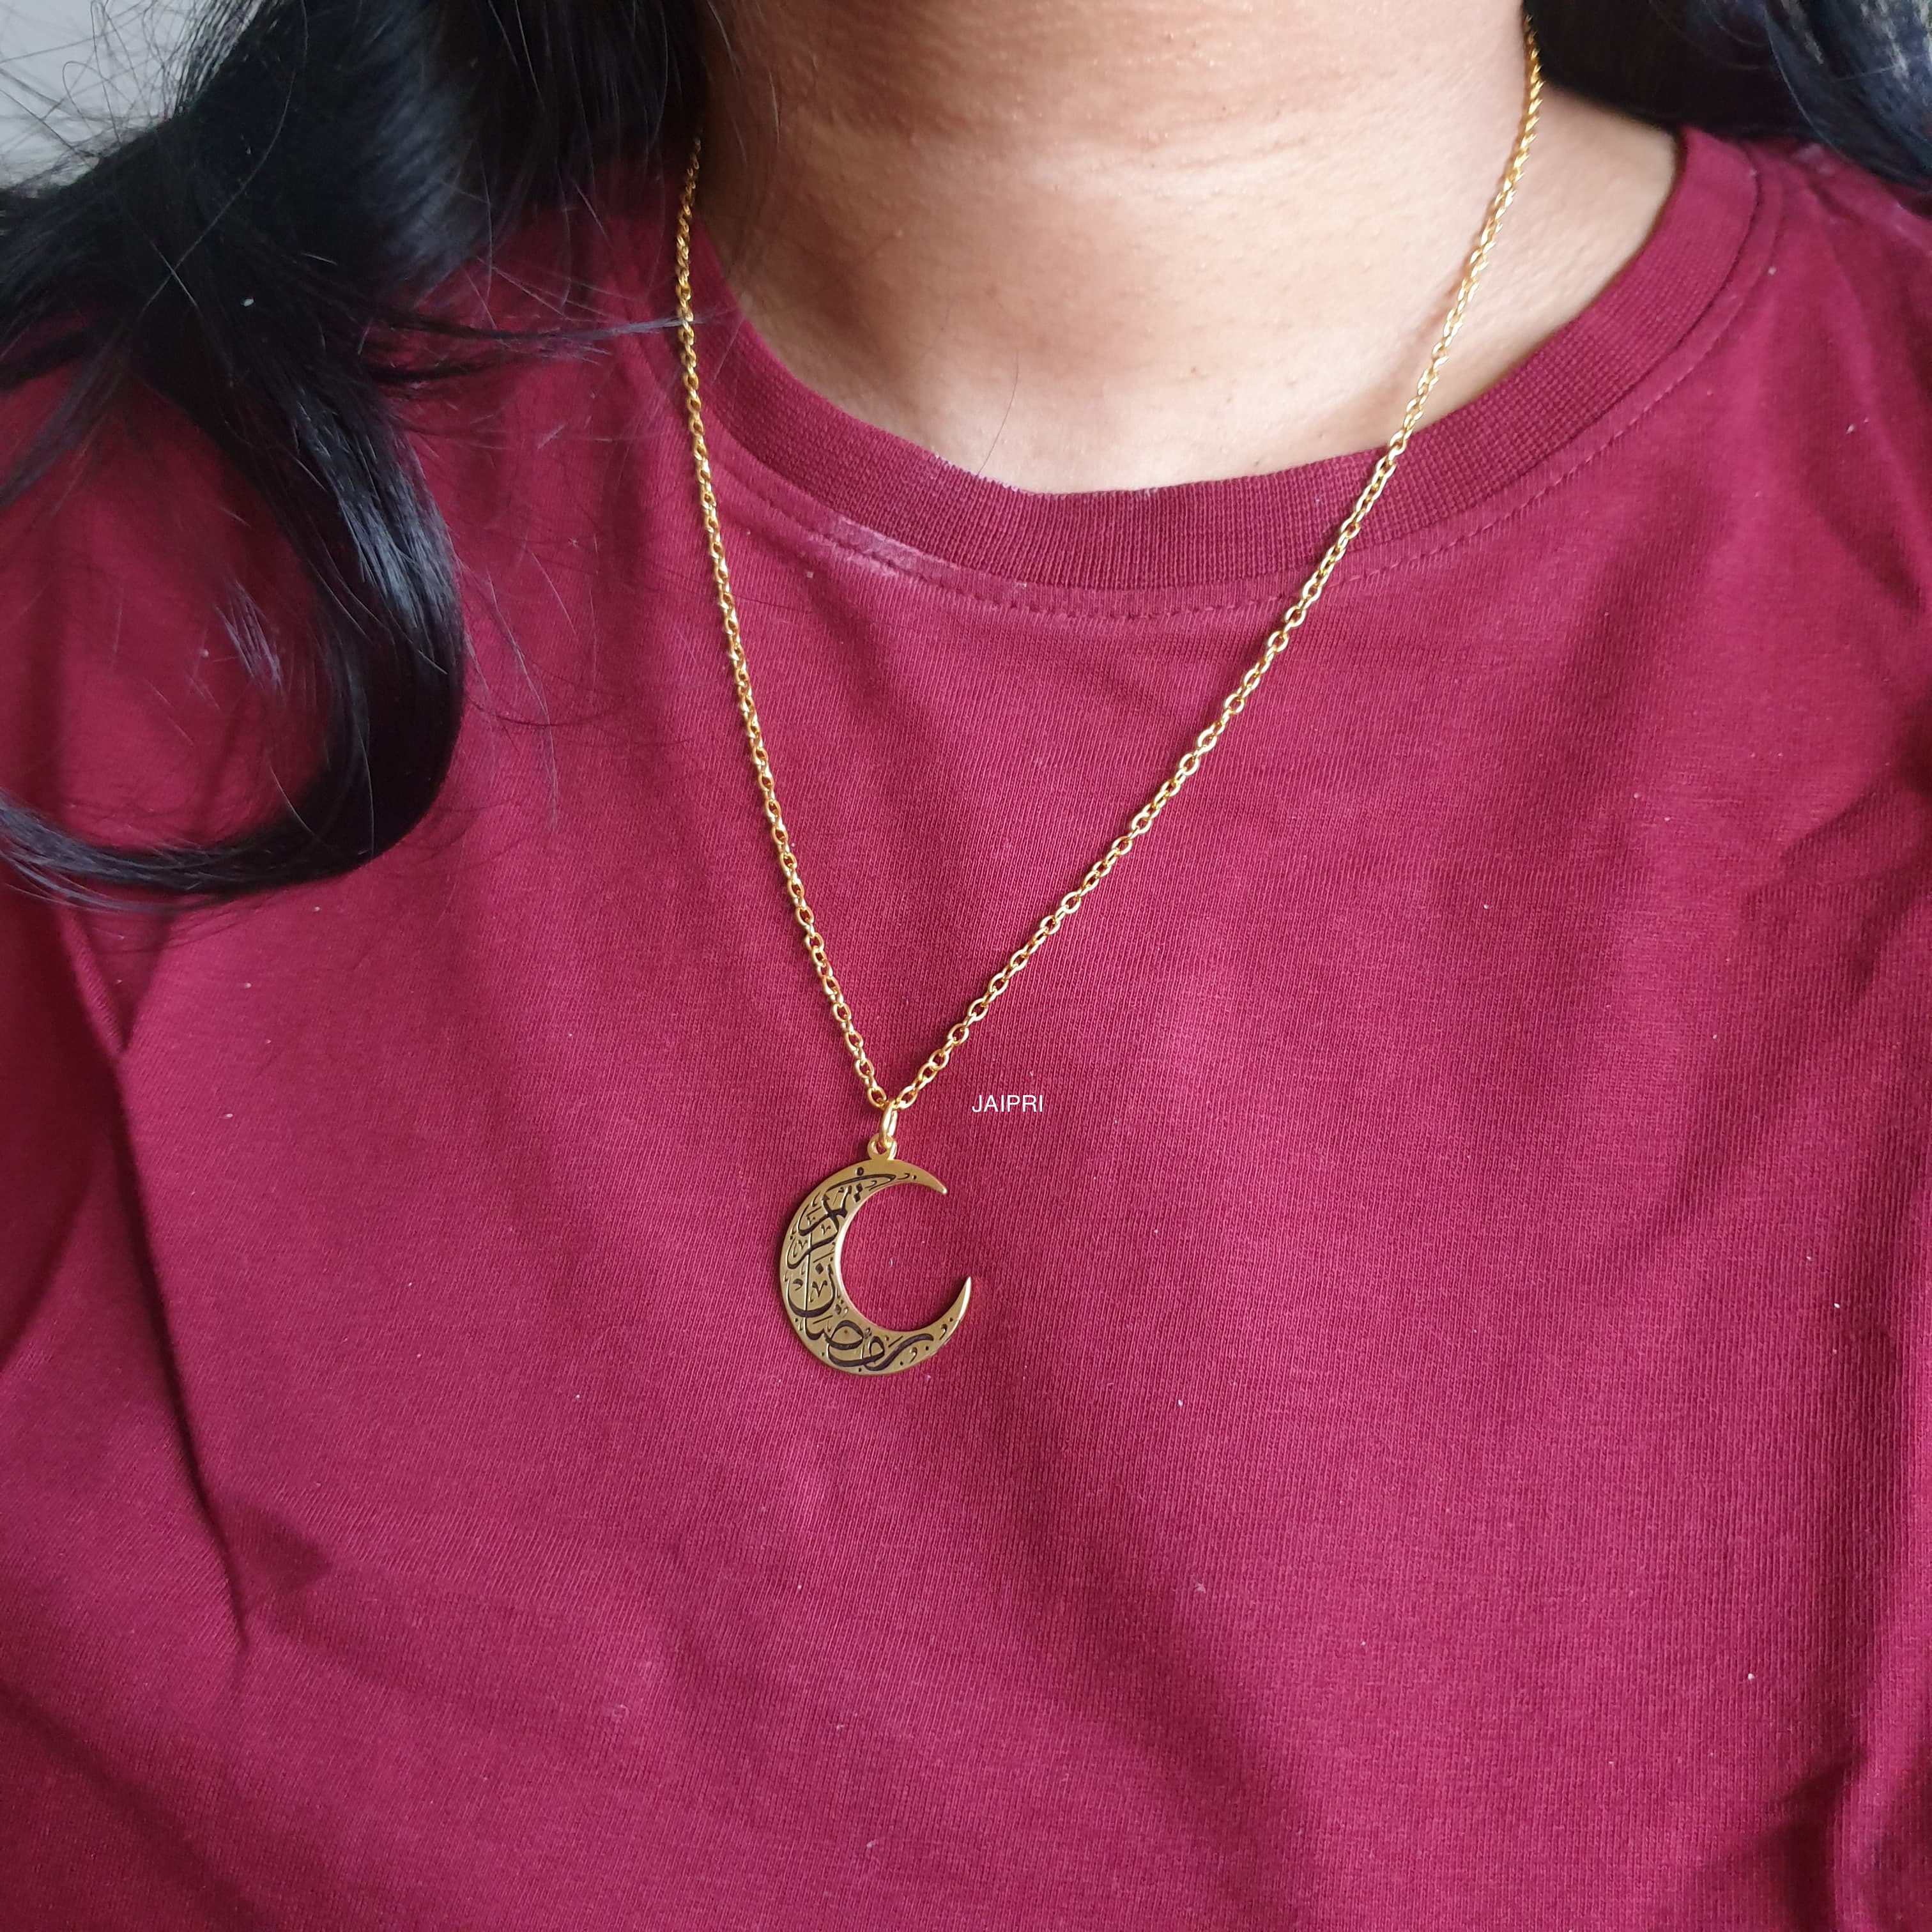 Arabic Gold Tone Moon Necklace